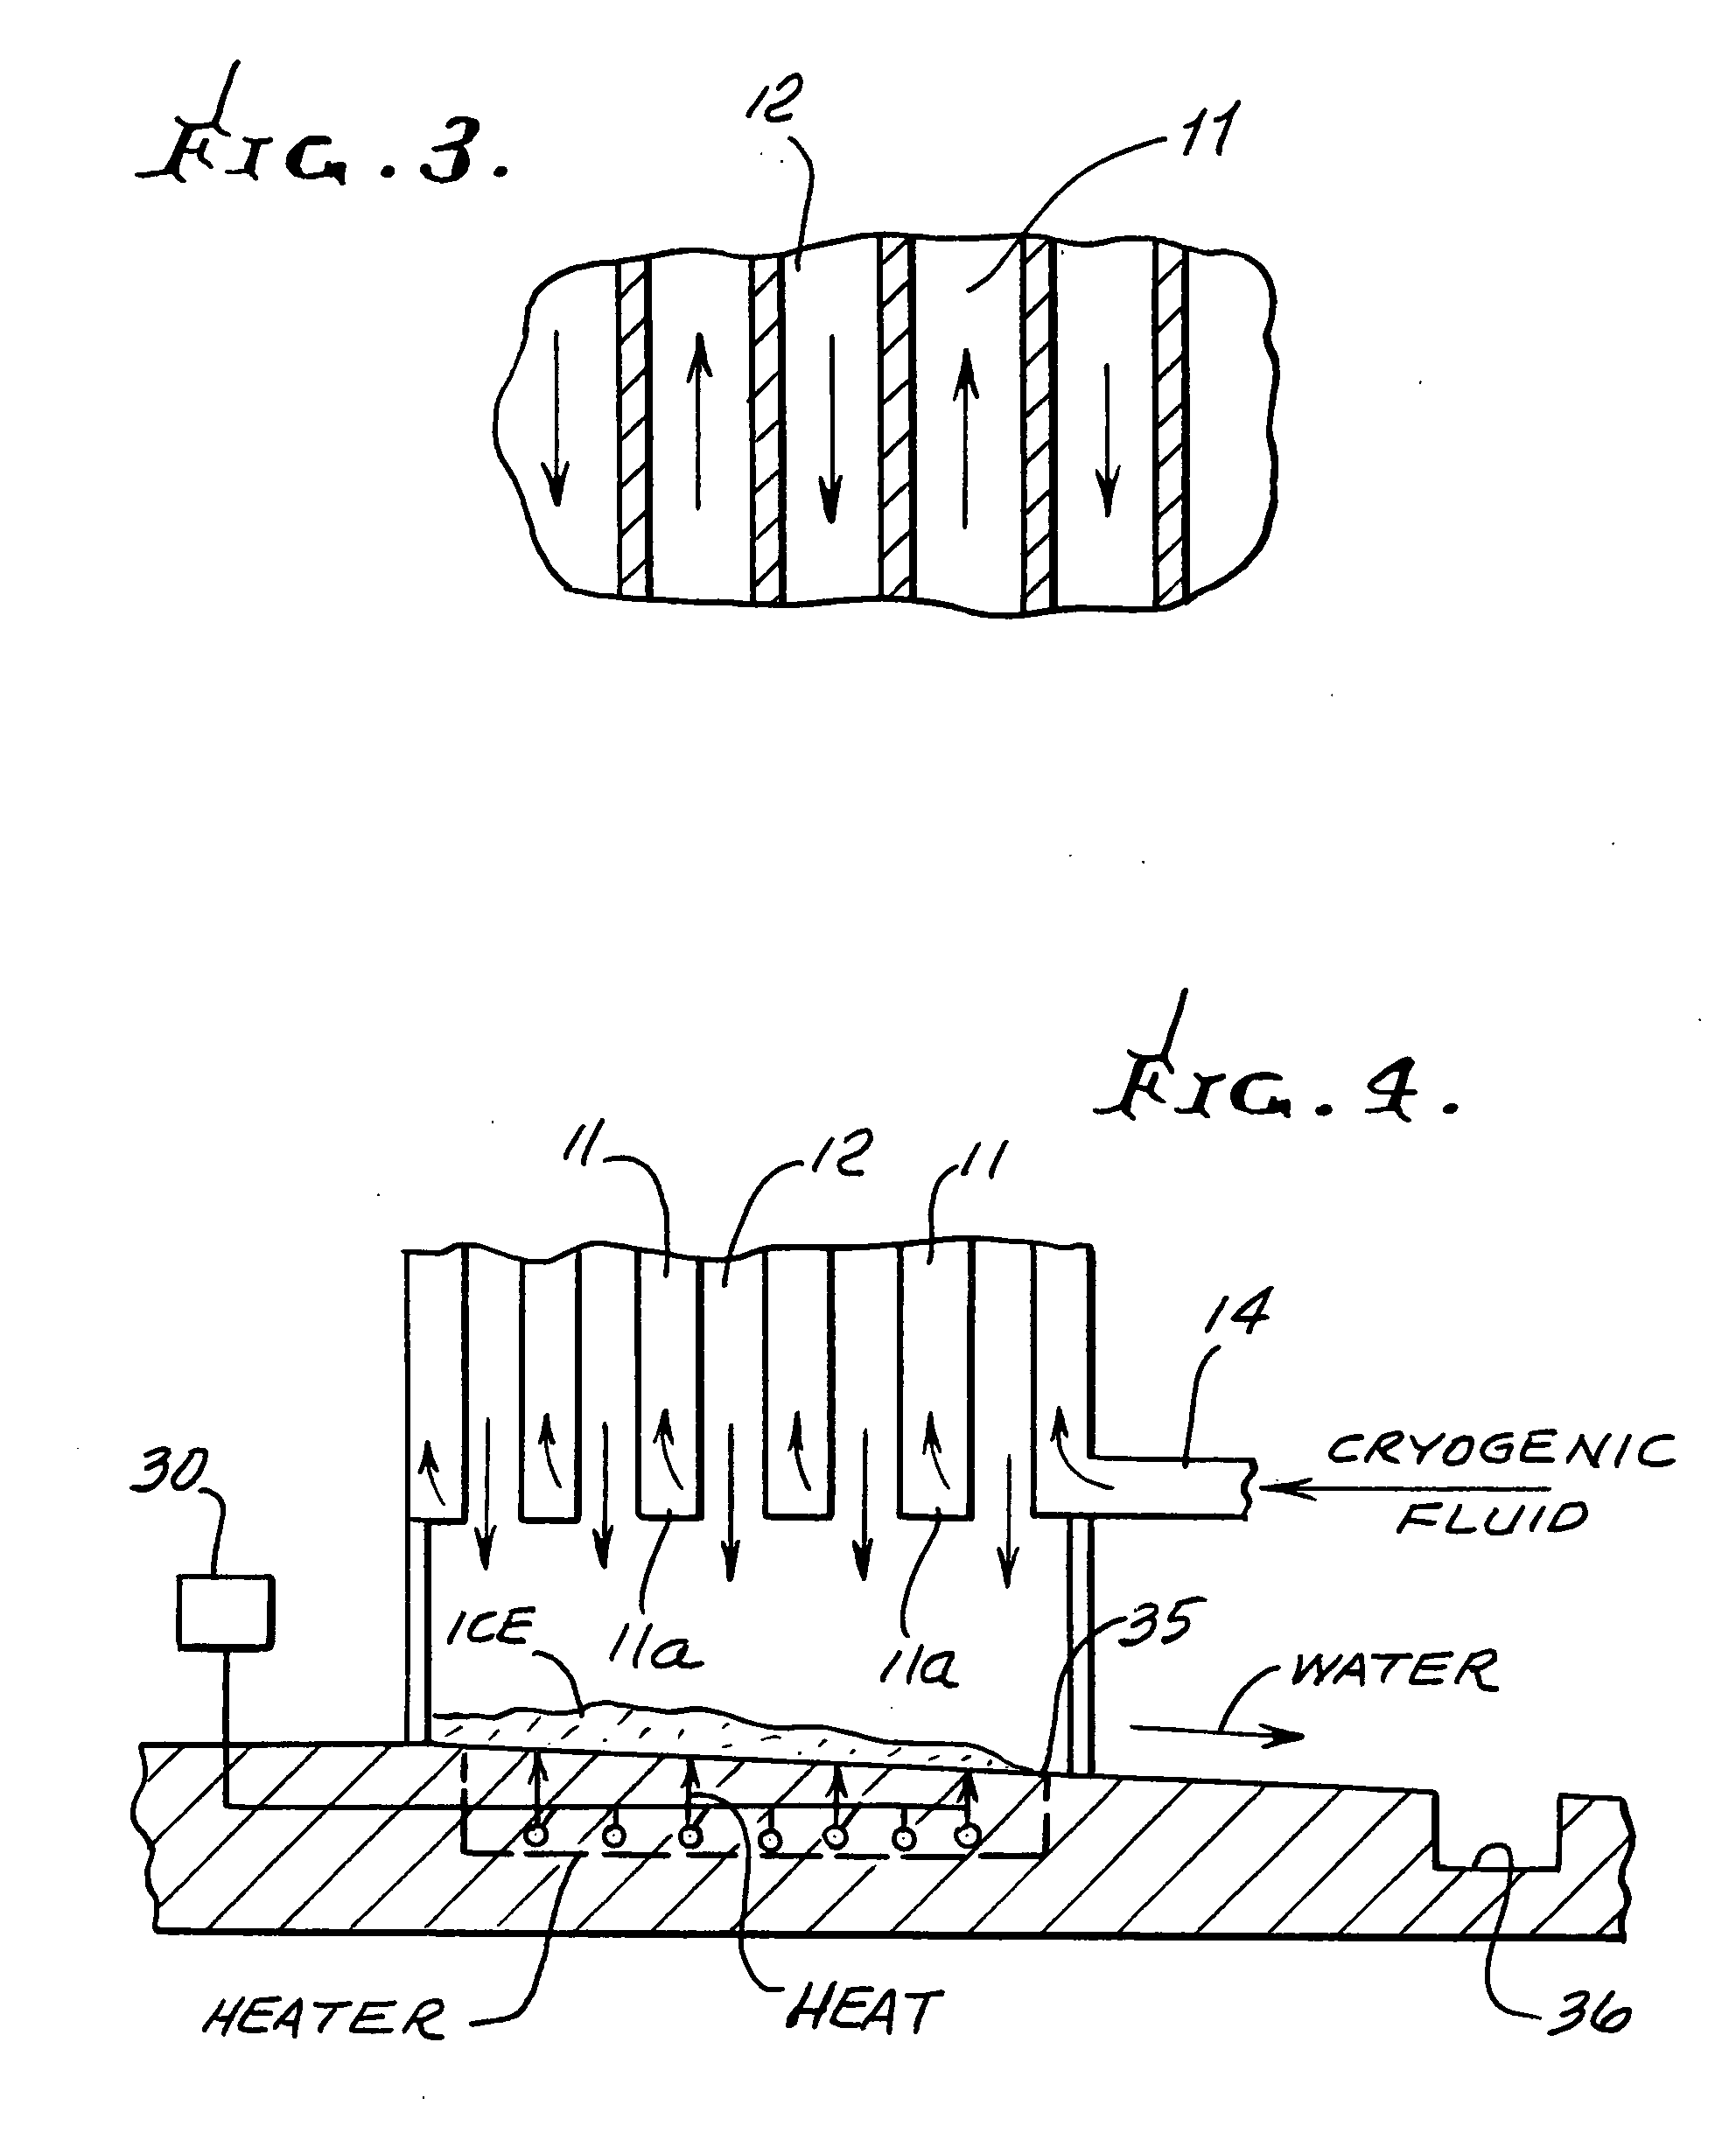 Thermal method for ice removal under ambient air cryogenic vaporizers